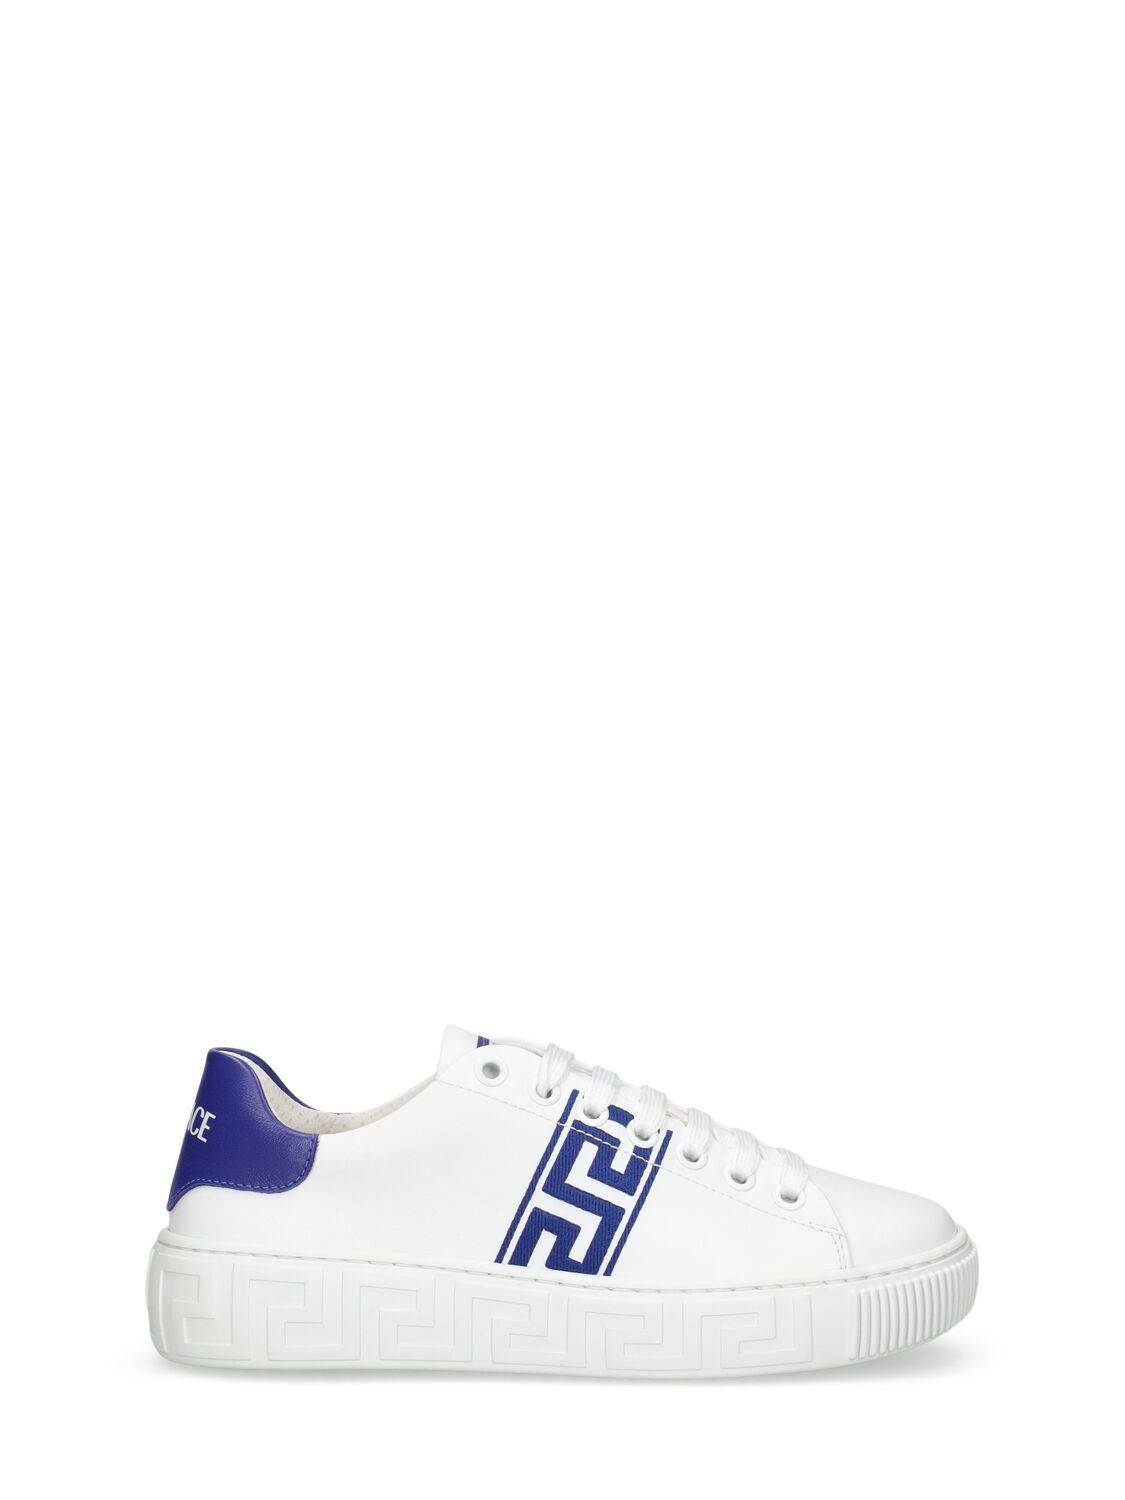 La Greca Leather & Fabric Sneakers by VERSACE